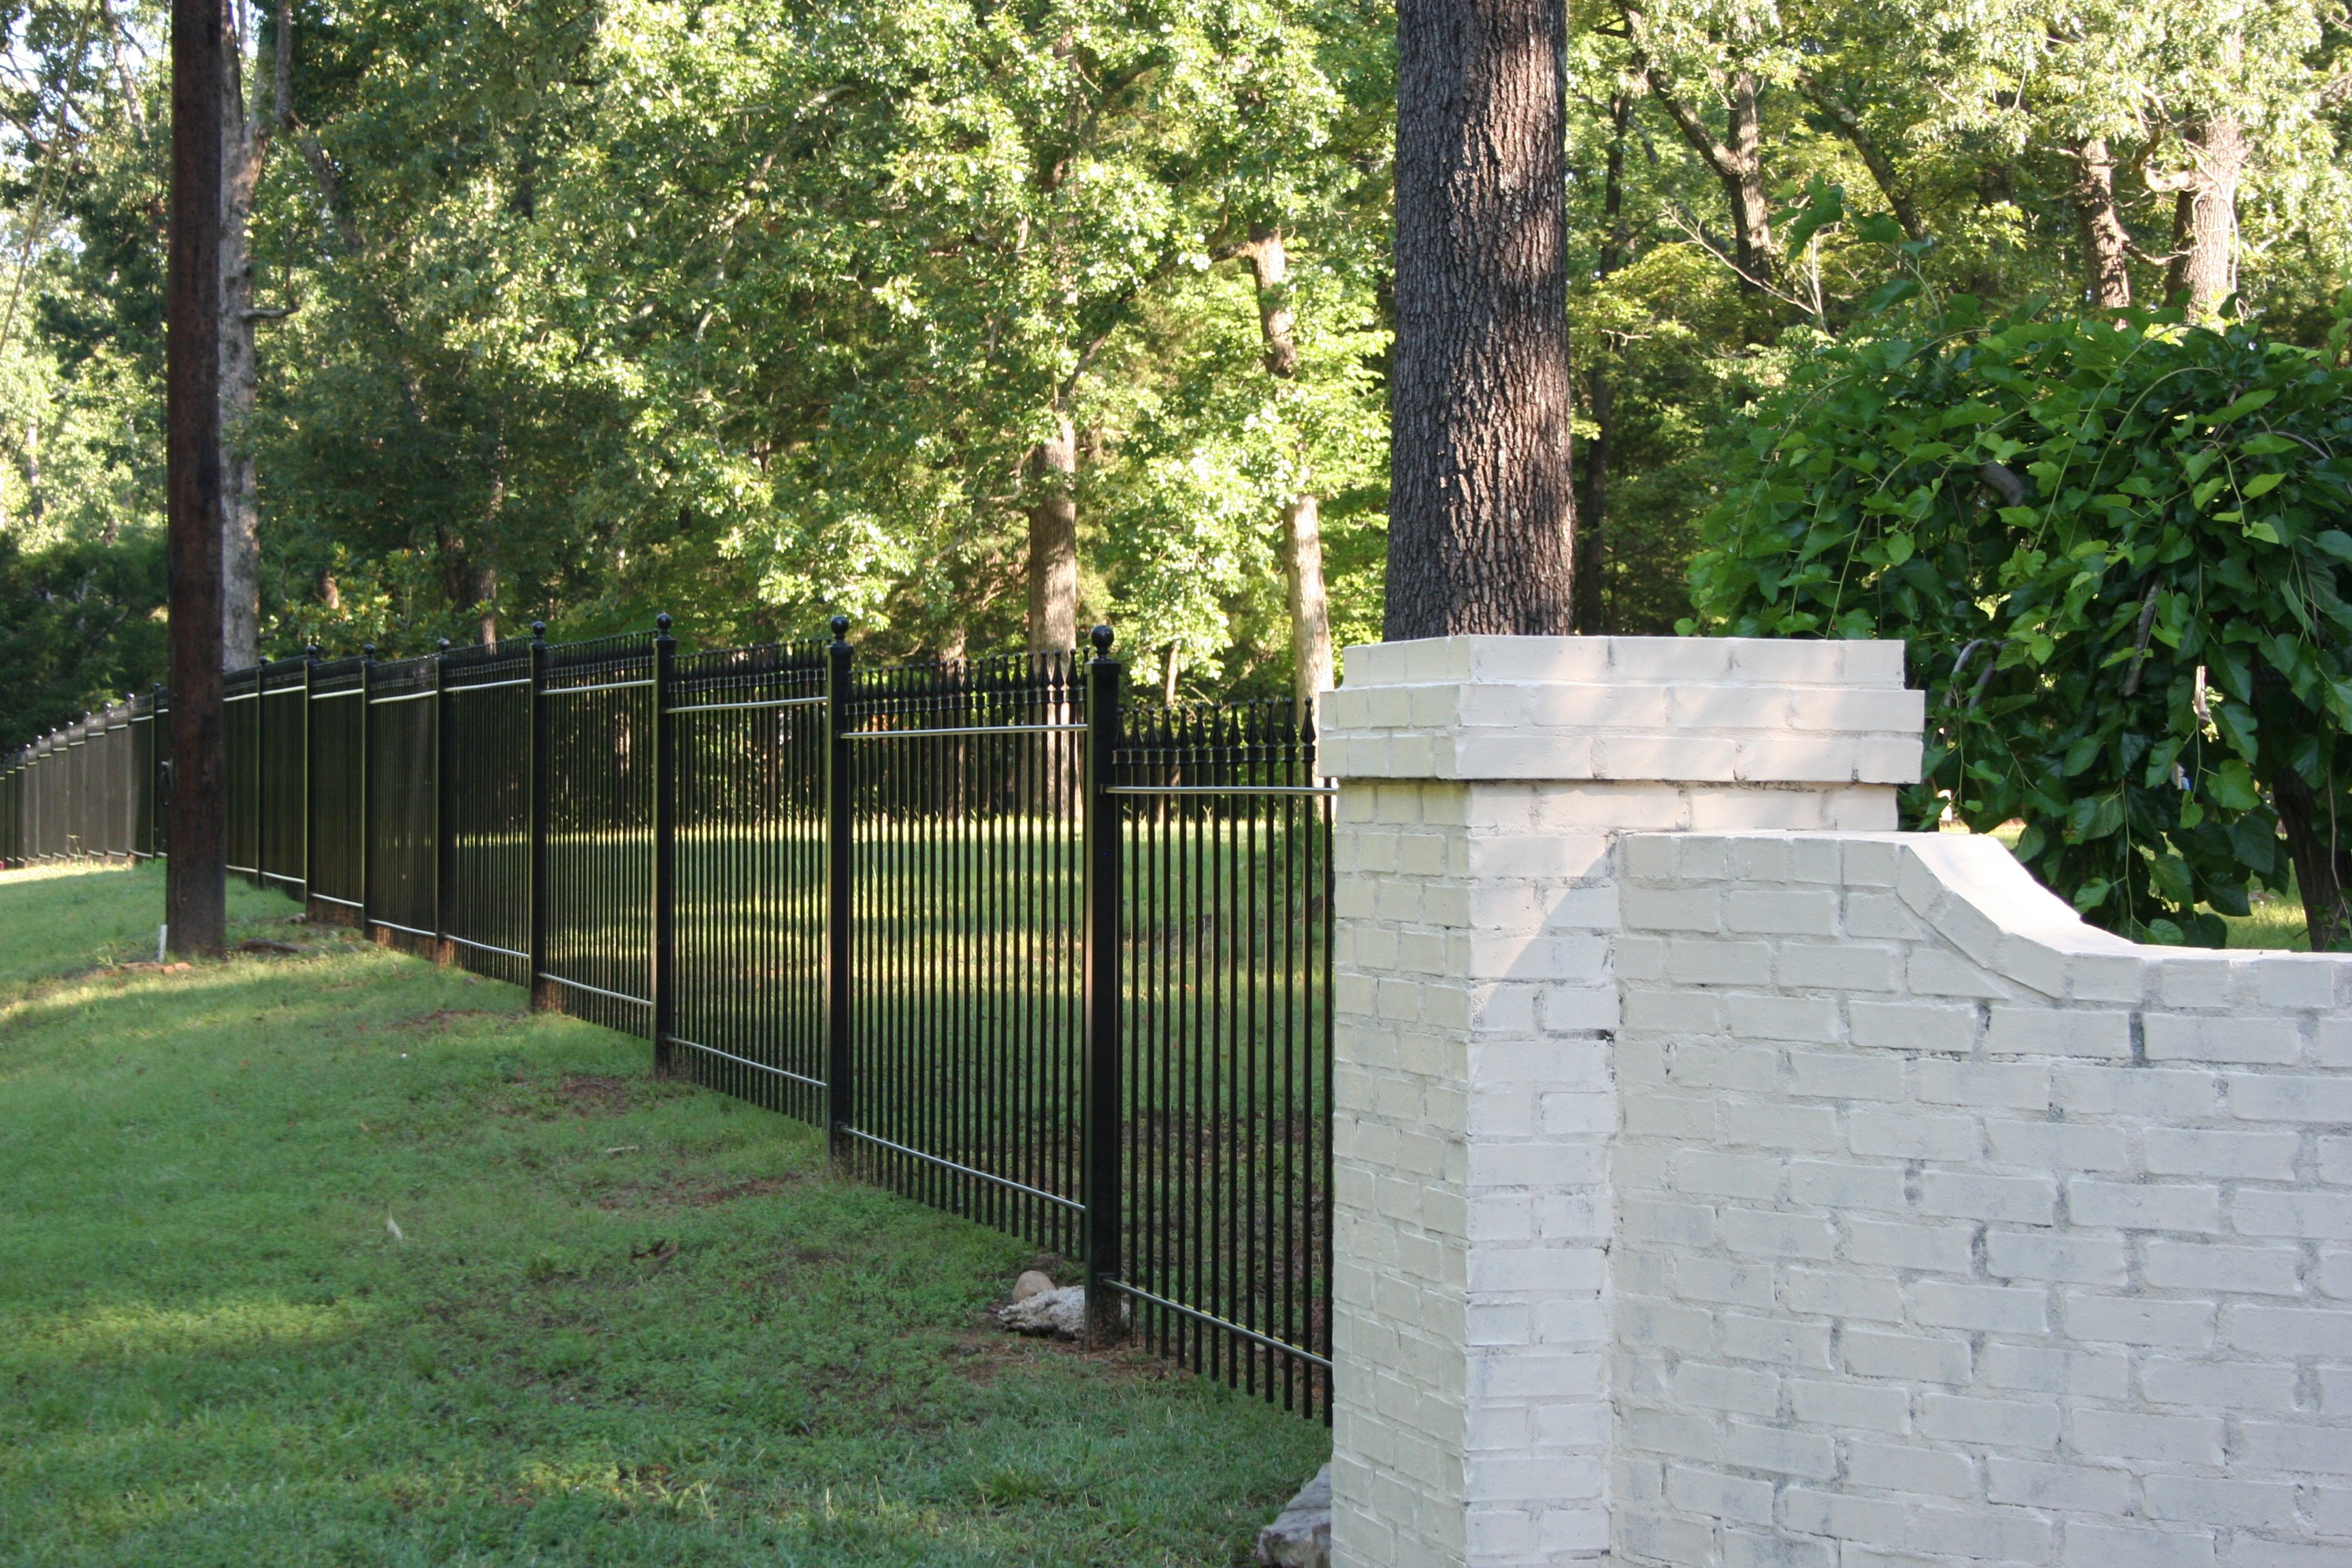 How To Diy Install Iron Fence Or Aluminum Fence On A Hill Slope Or